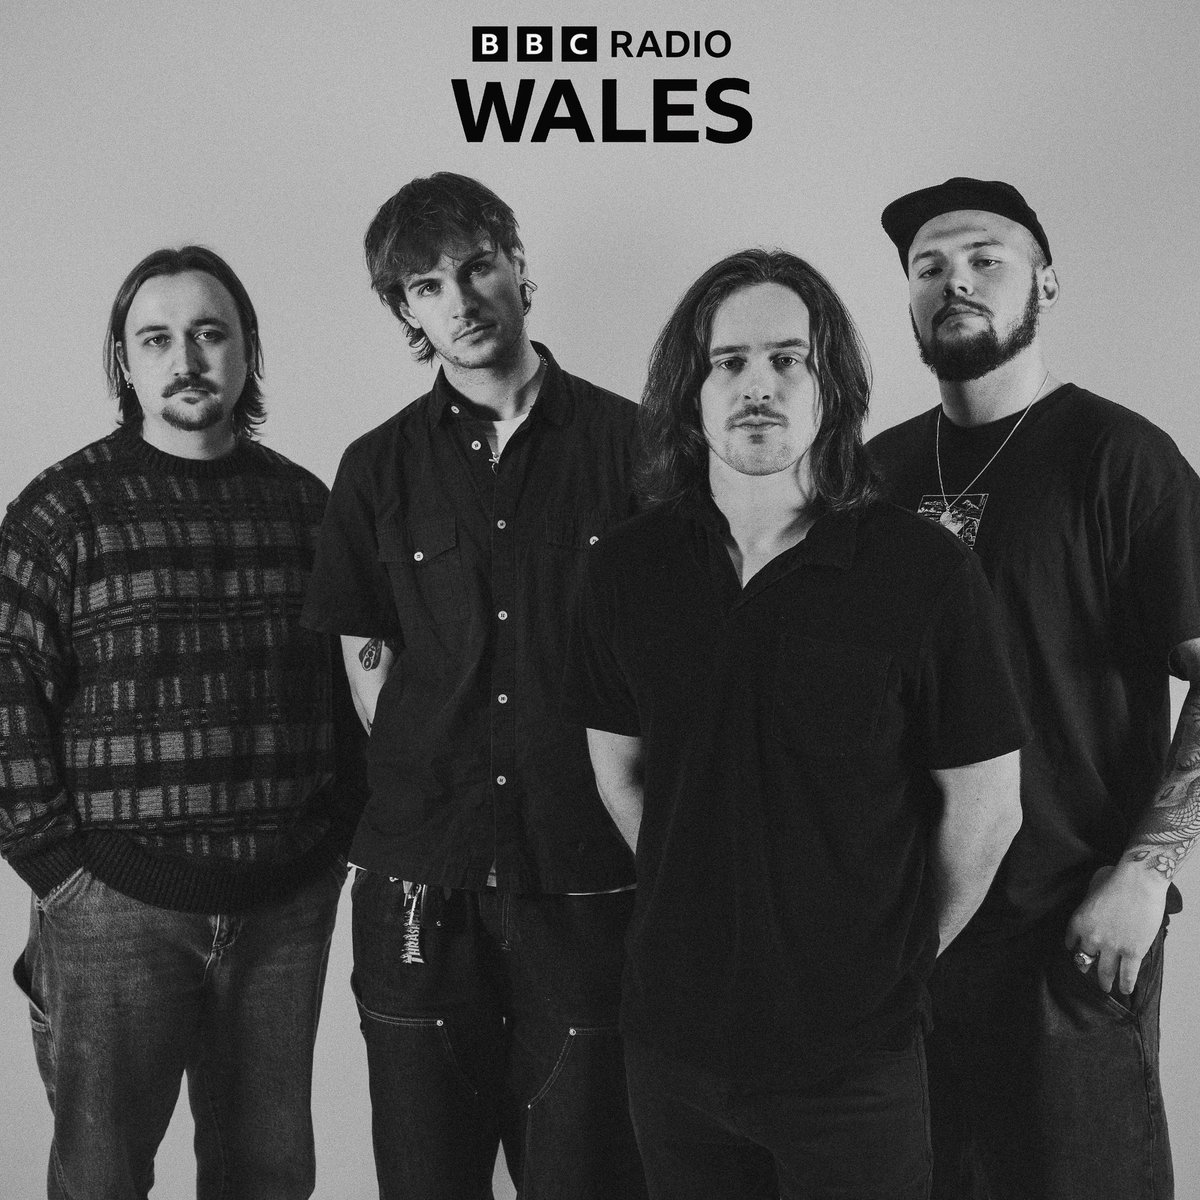 BBC RADIO WALES 🏴󠁧󠁢󠁷󠁬󠁳󠁿📻 ‘Best Kept Secret’ makes it radio debut TONIGHT on Adam Walton’s introducing show on BBC Radio Wales. Huge thanks to Adam for supporting our music. Tune in on the BBC Sounds App. 📻 @adamthomaswalton @bbcintroducing